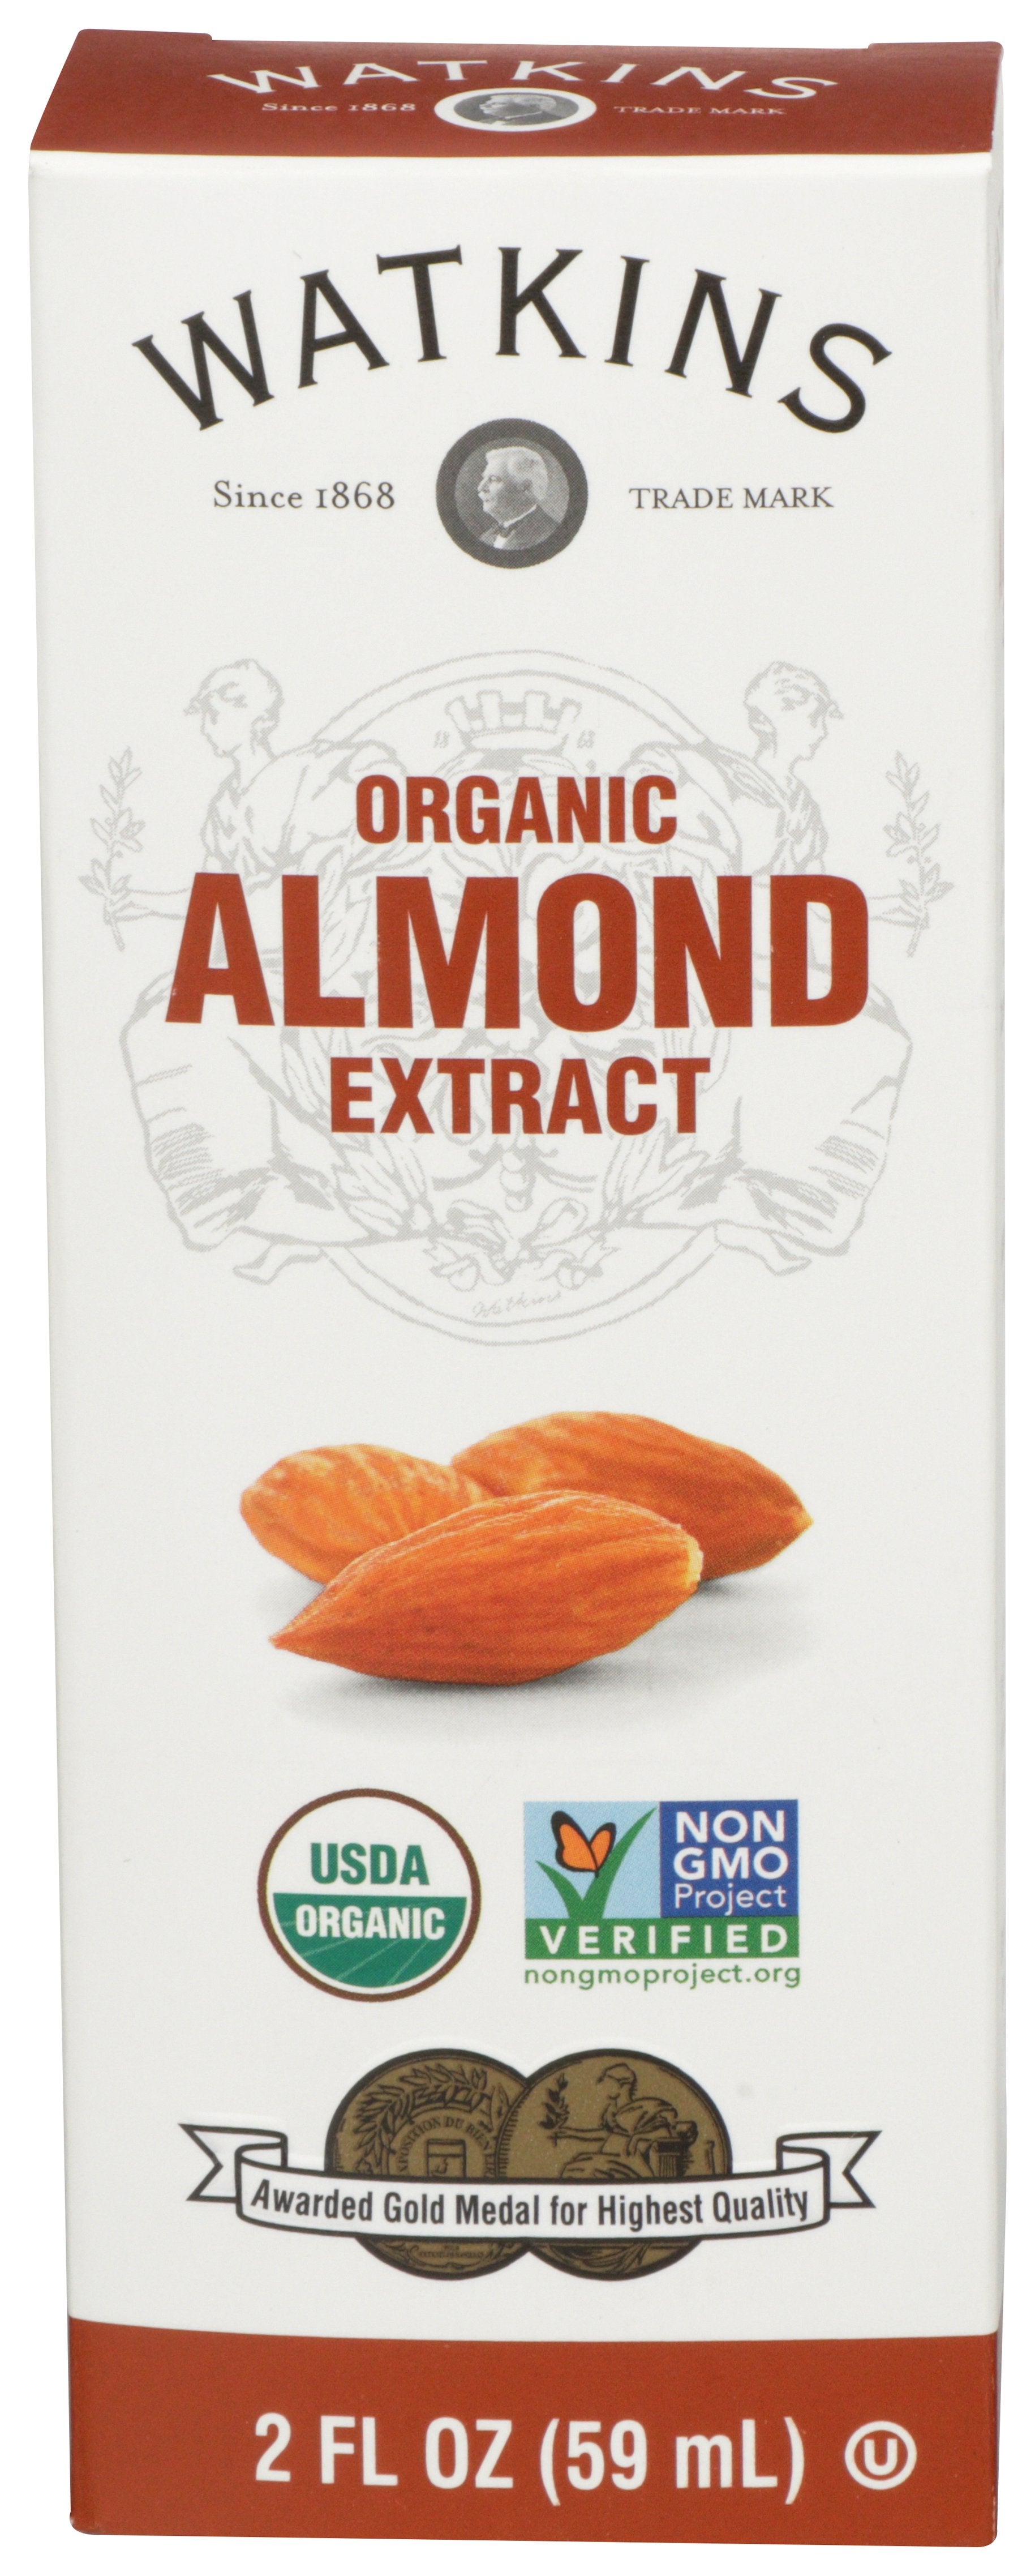 WATKINS EXTRACT ALMOND ORG - Case of 12